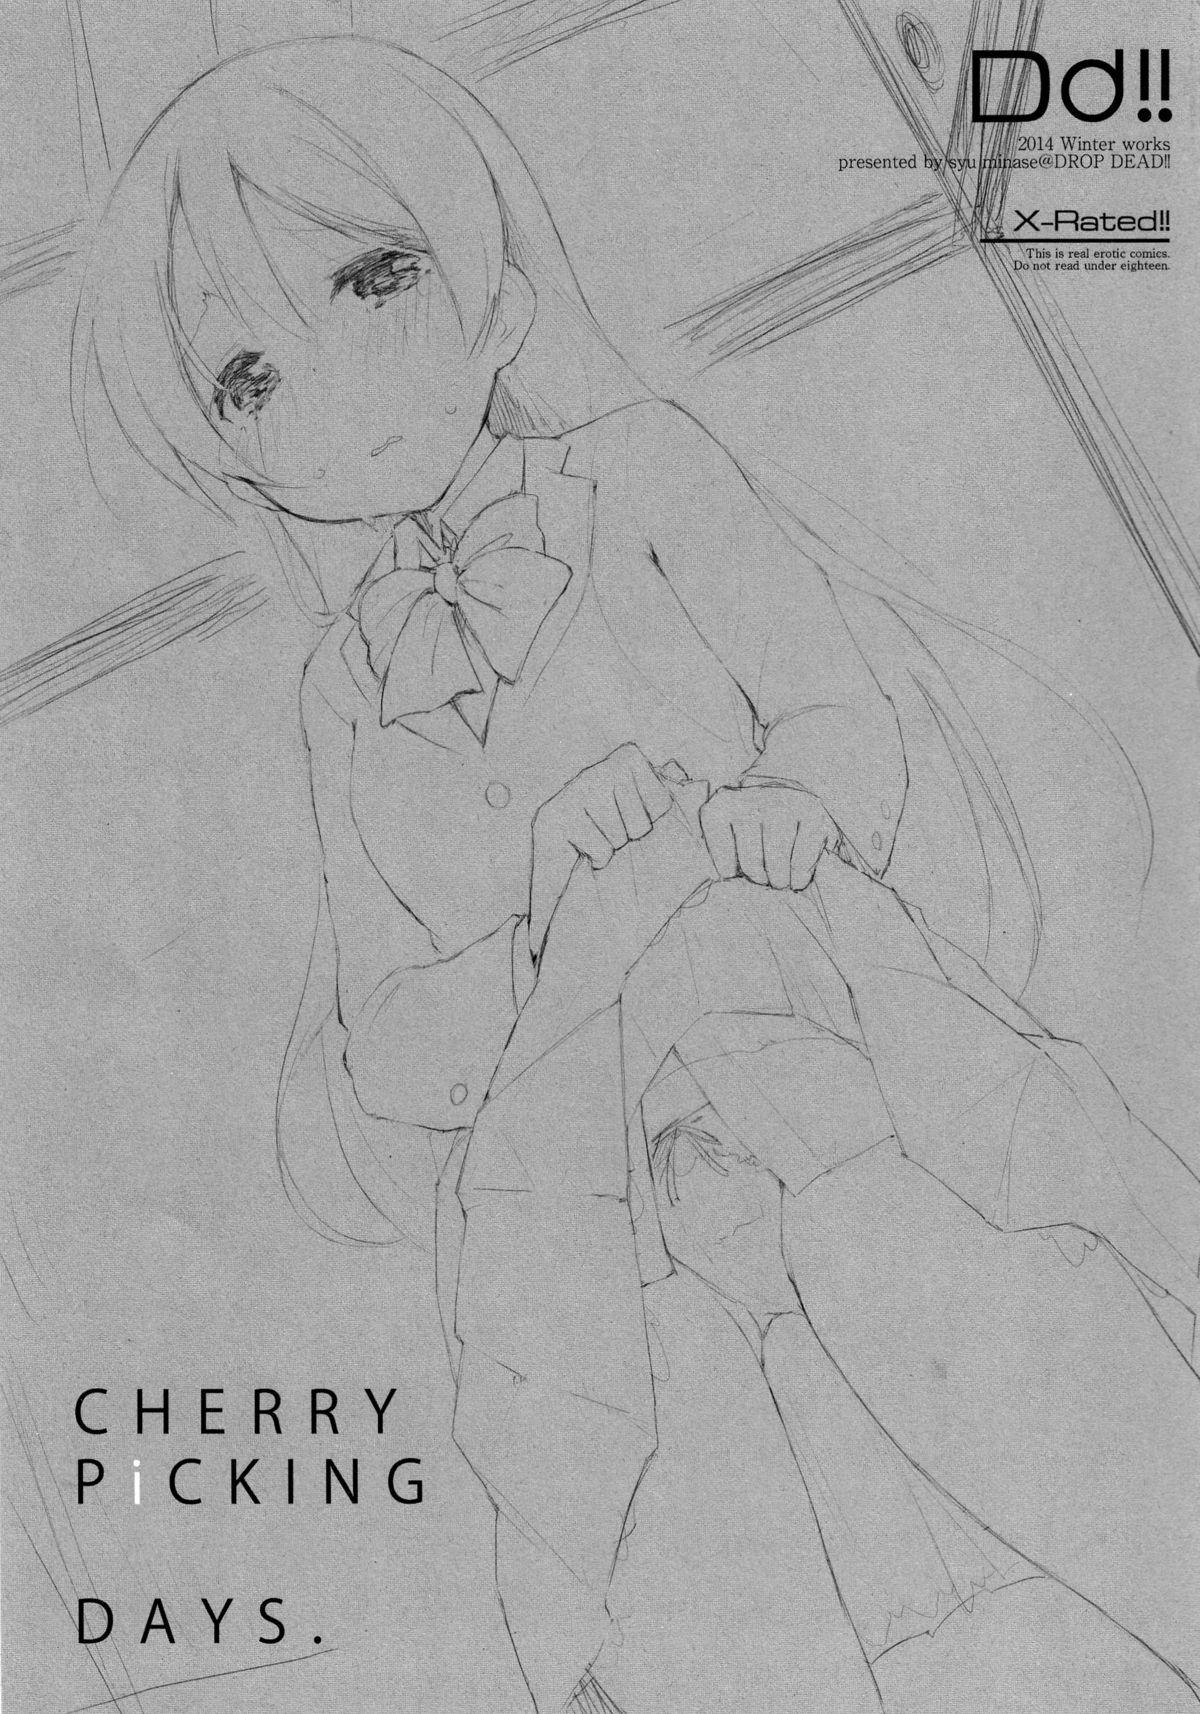 Point Of View CHERRY PiCKING DAYS - Love live Teensex - Page 3